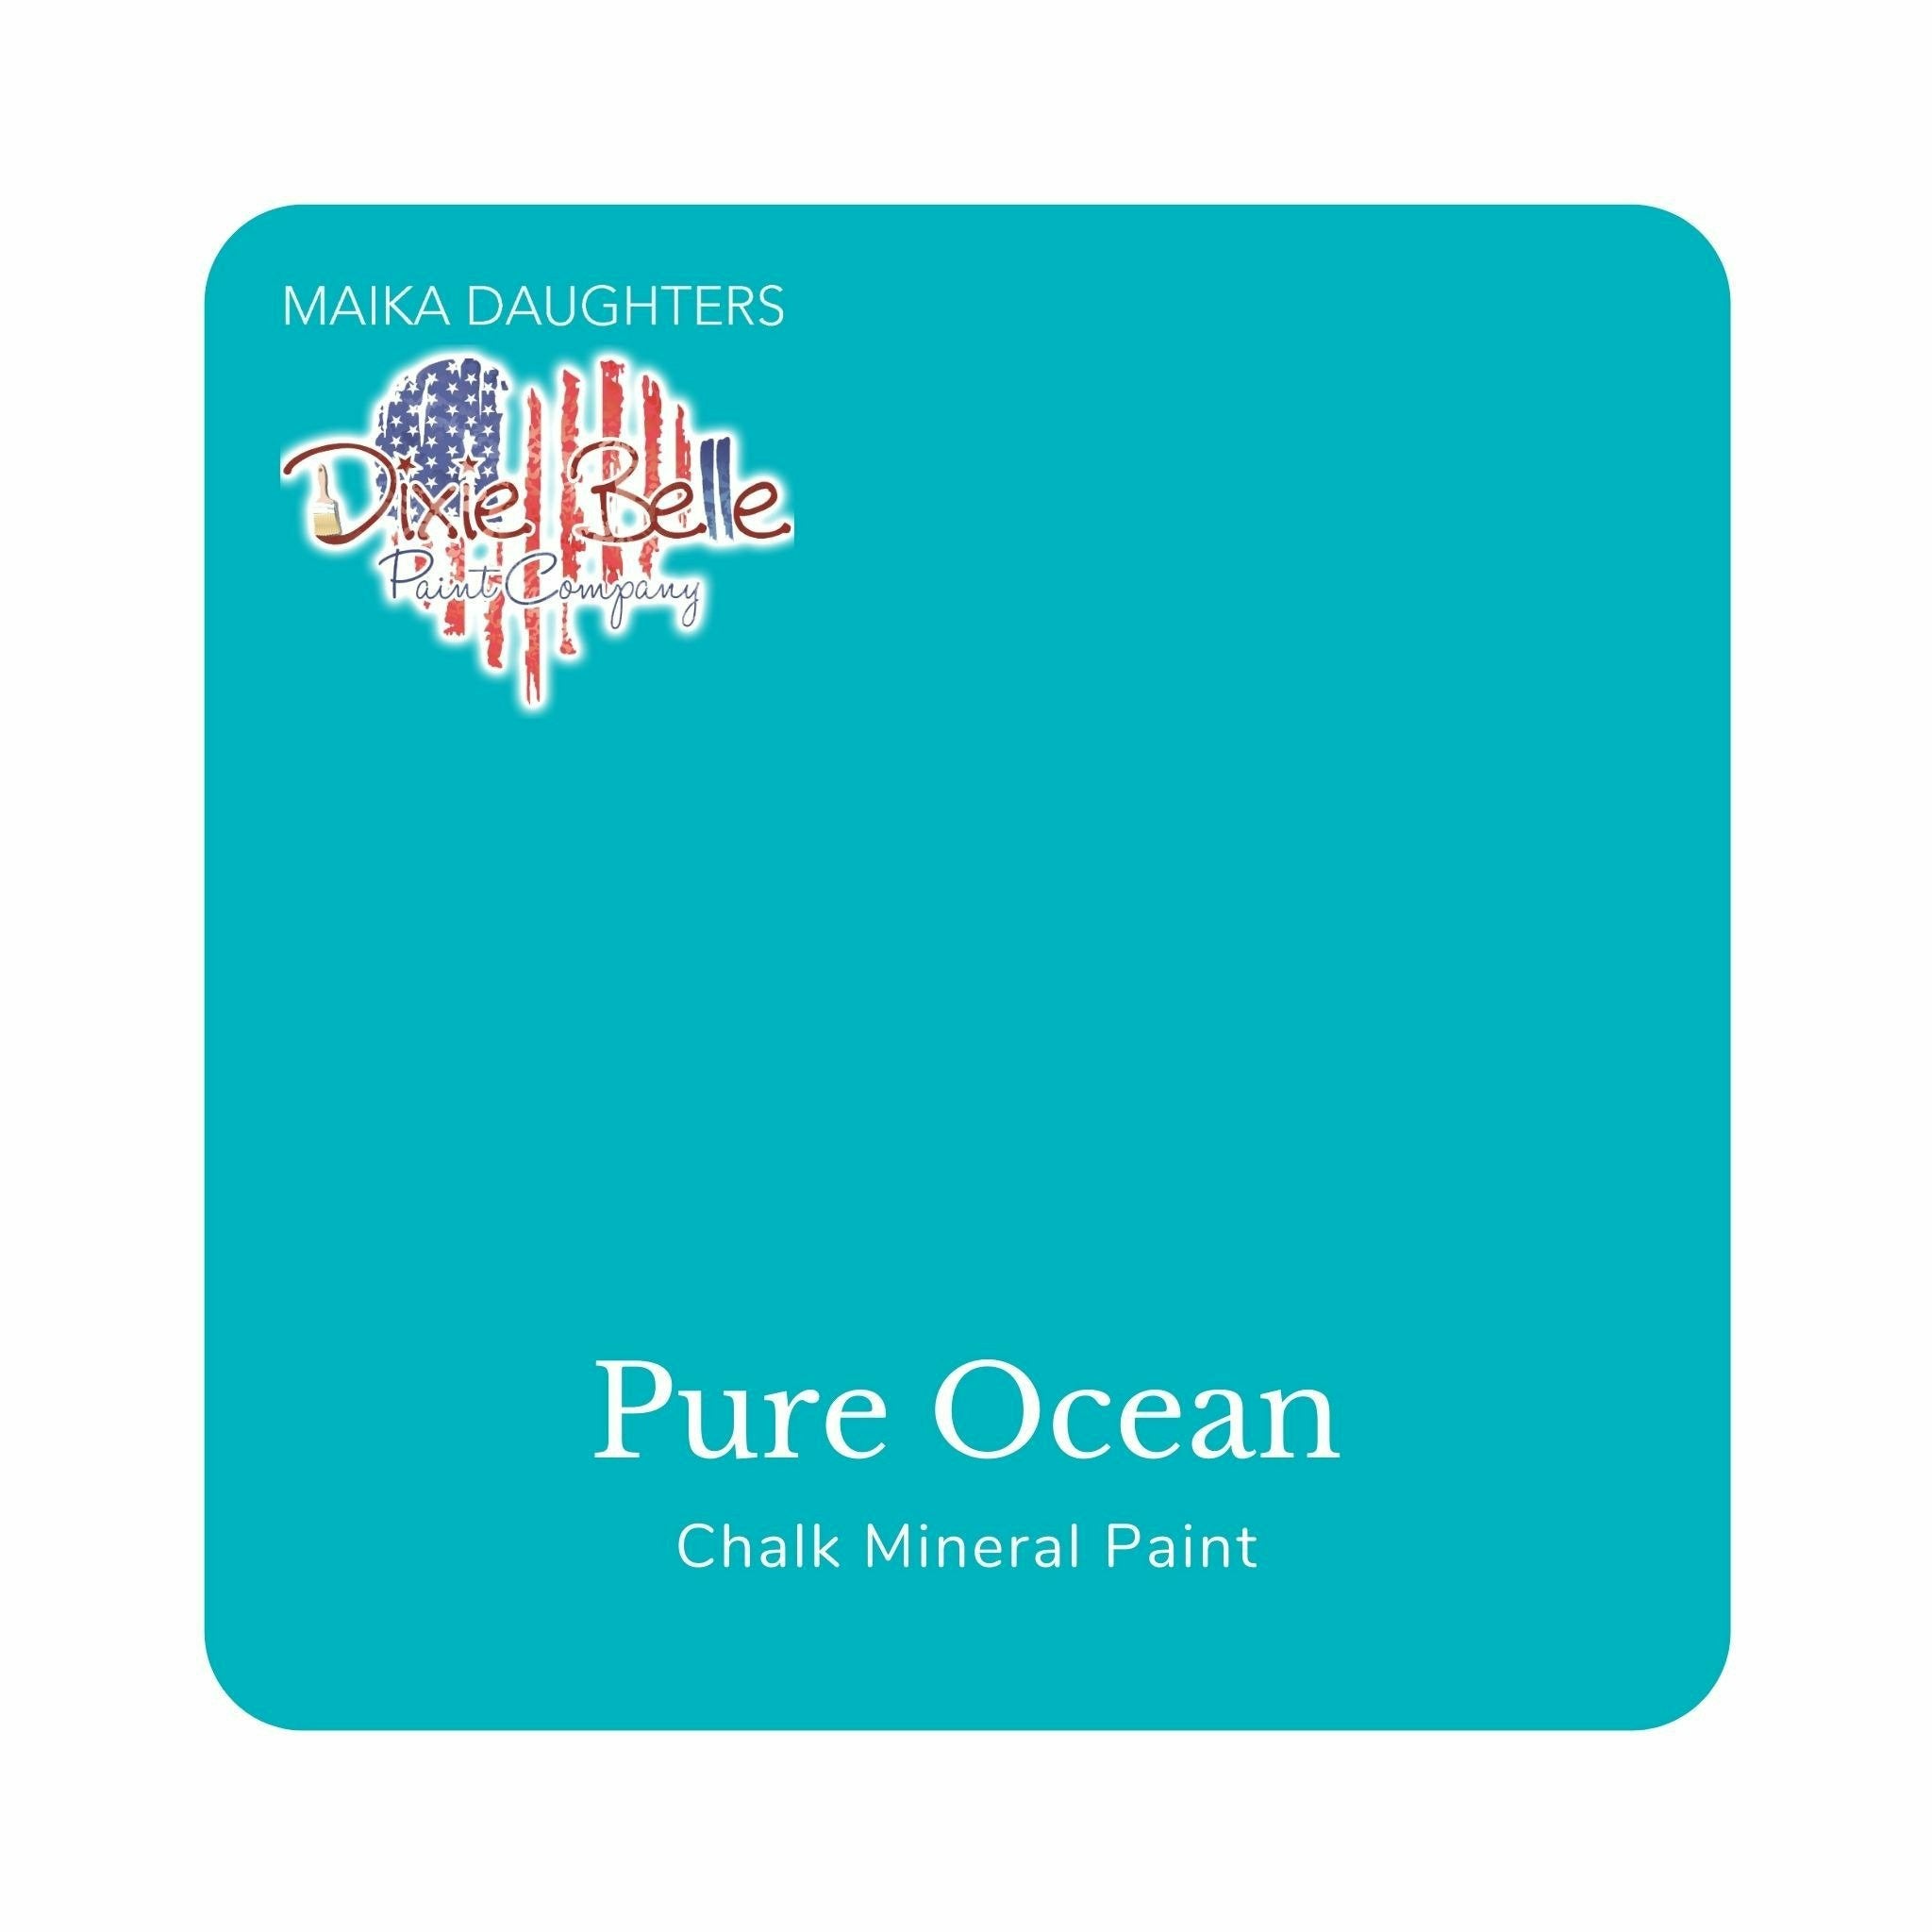 A square swatch card of Dixie Belle Paint Company’s Pure Ocean Chalk Mineral Paint is against a white background. This color is a vivid turquoise blue.